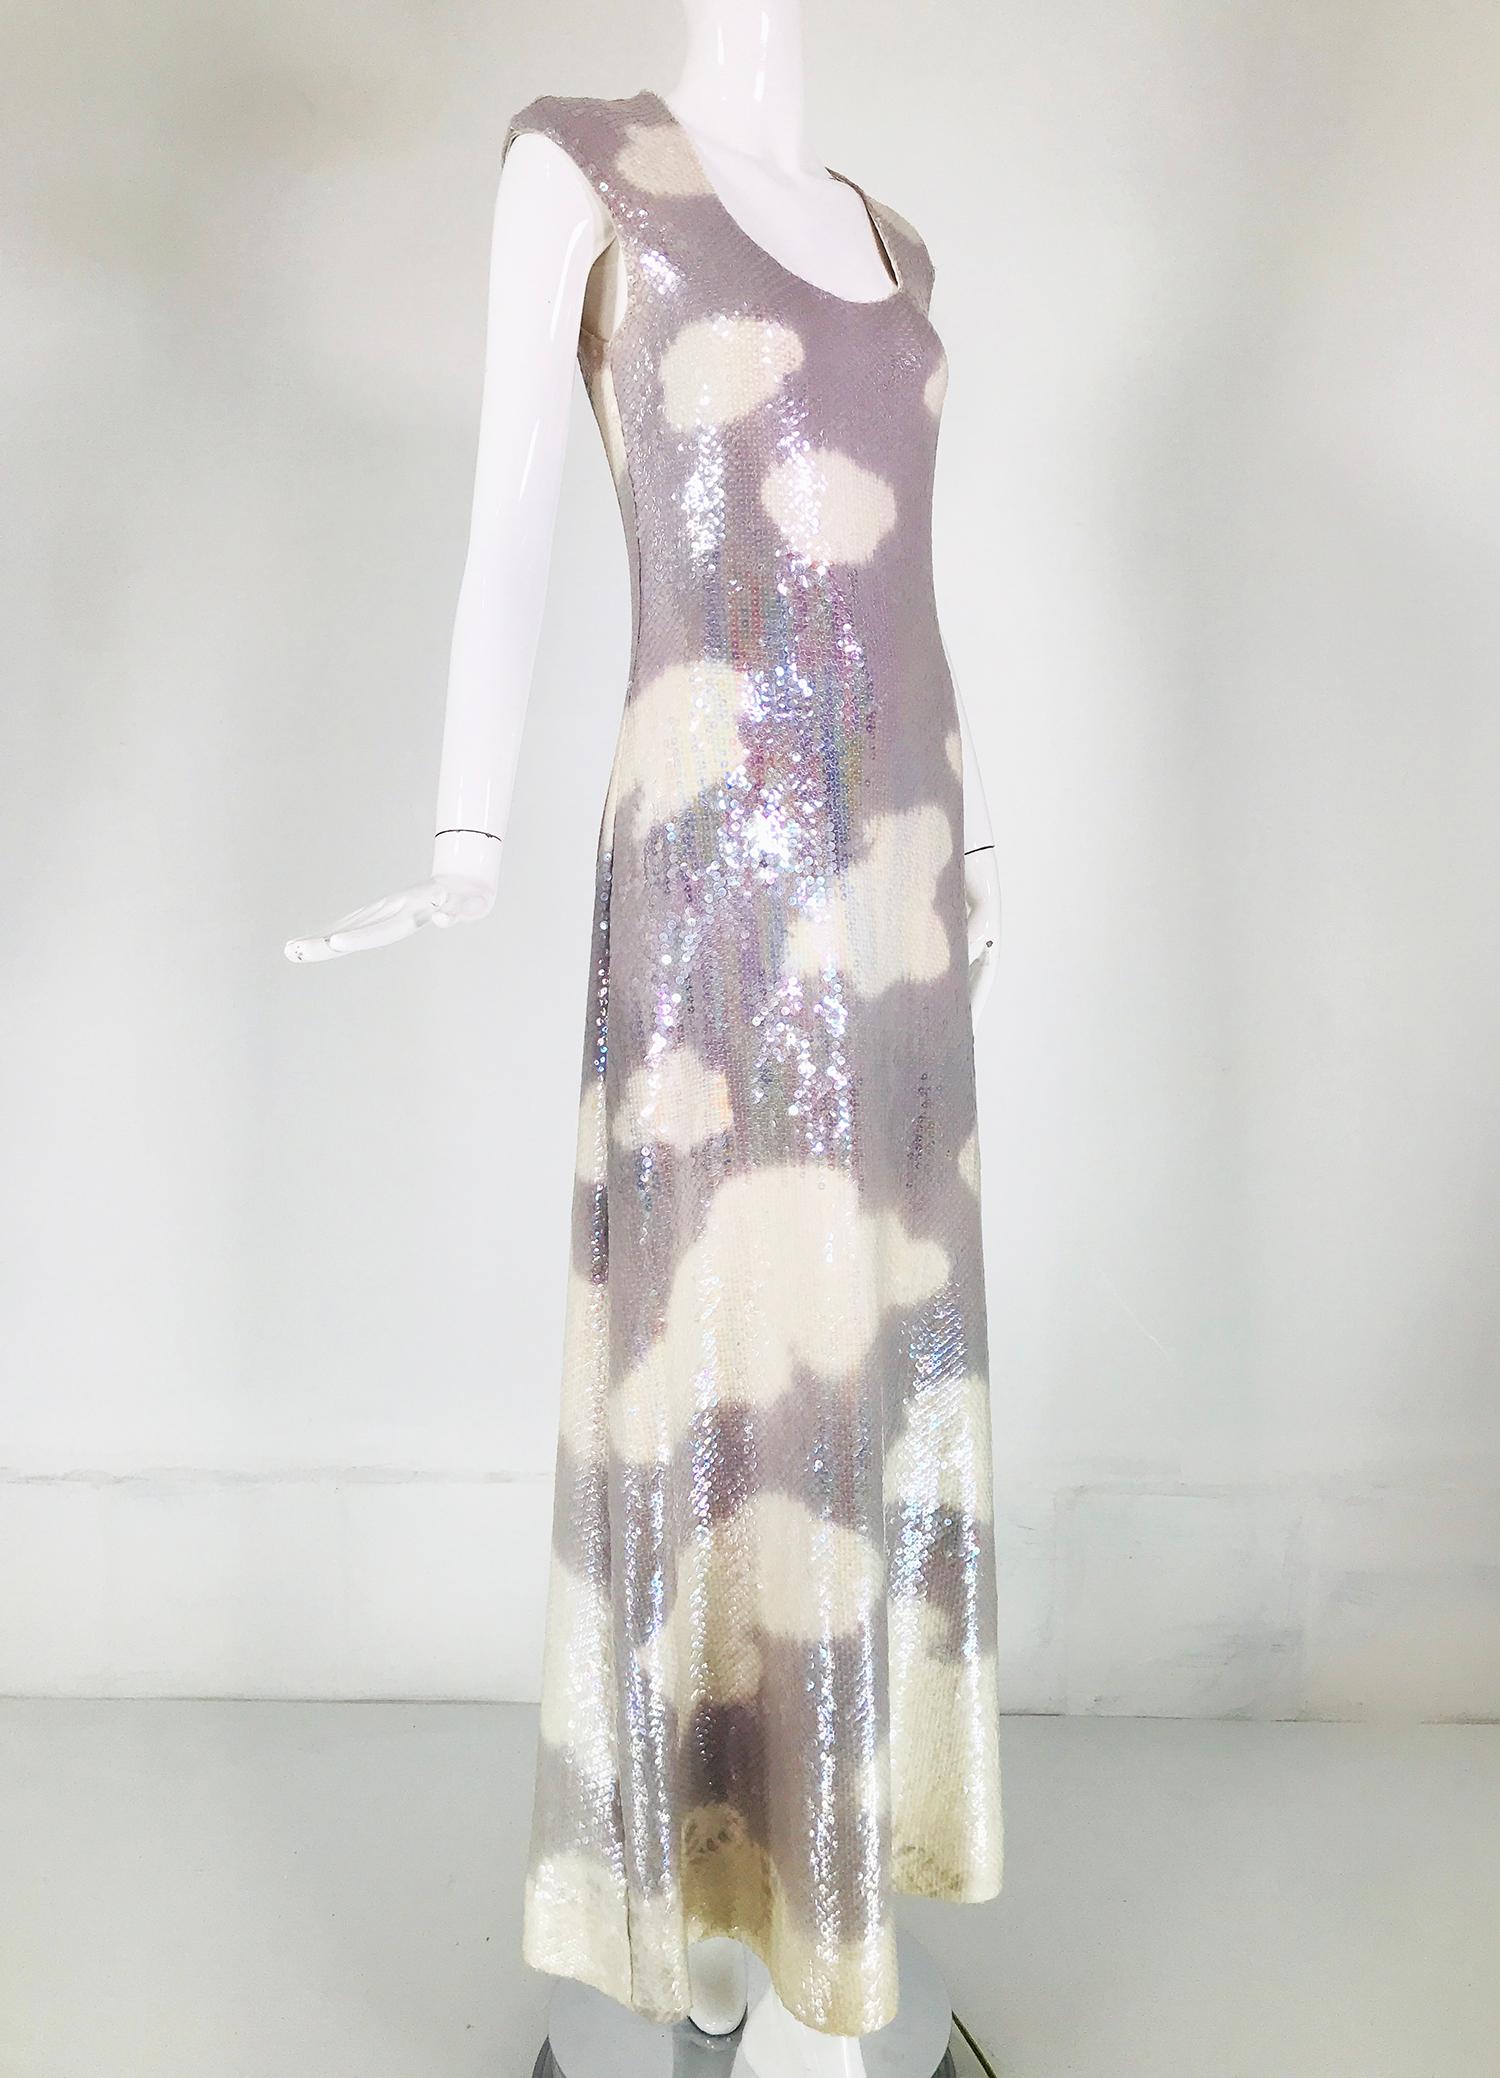 Halston iconic clouds dress in stormy grey & cream with iridescent sequins from the mid 1970s. This dress is unusual as the grey is a bit darker than the dove gray that is seen more often, not that the dress turns up that frequently! Such a concept